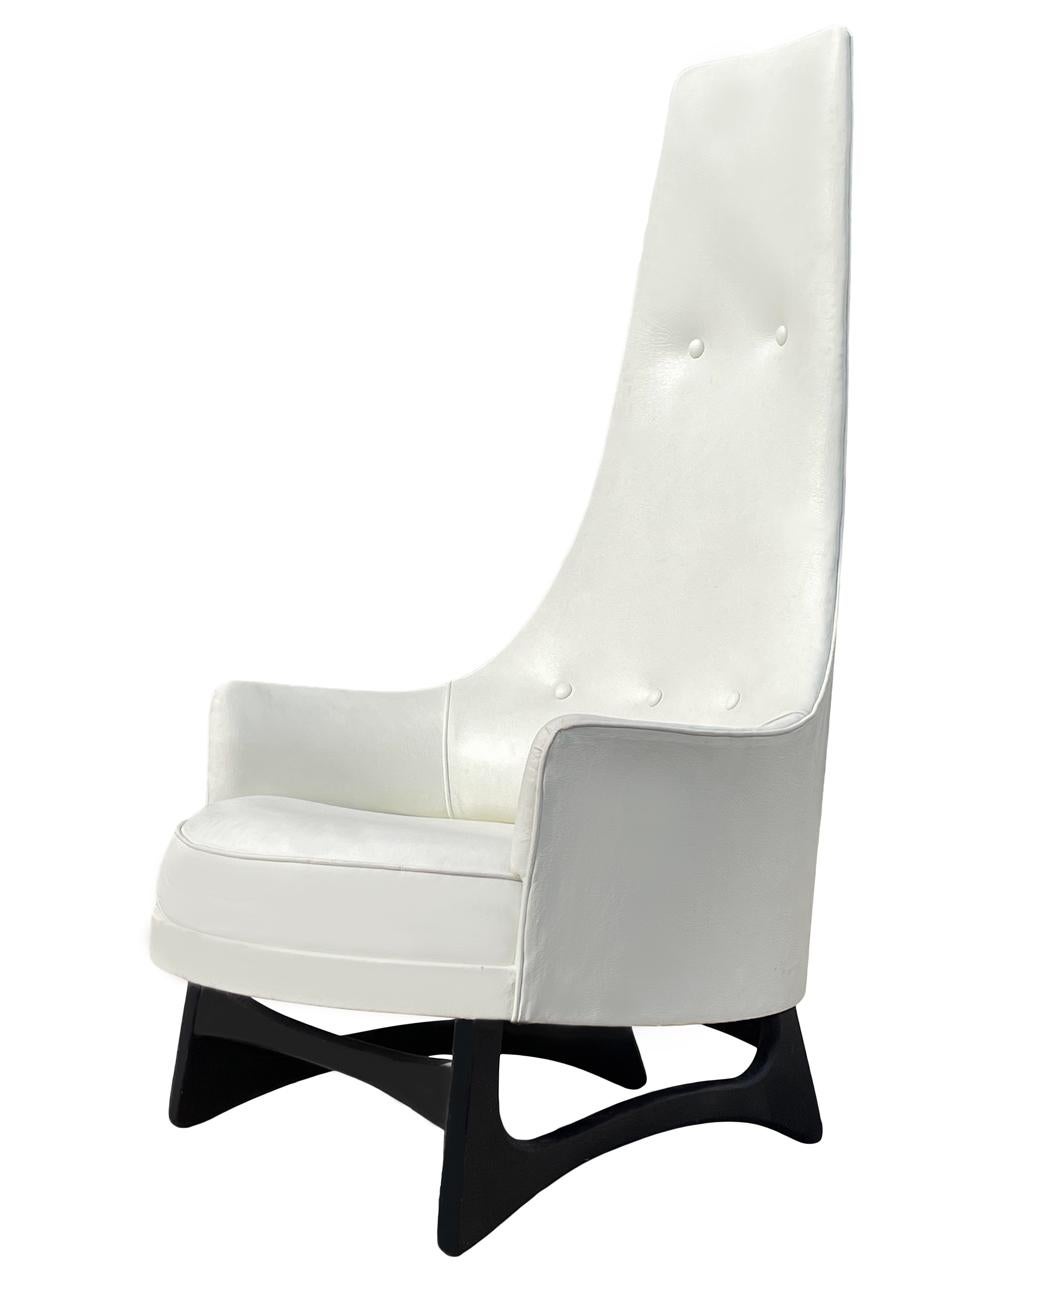 Mid-Century Modern High Back Lounge Chair in White Naugahyde by Adrian Pearsall 1